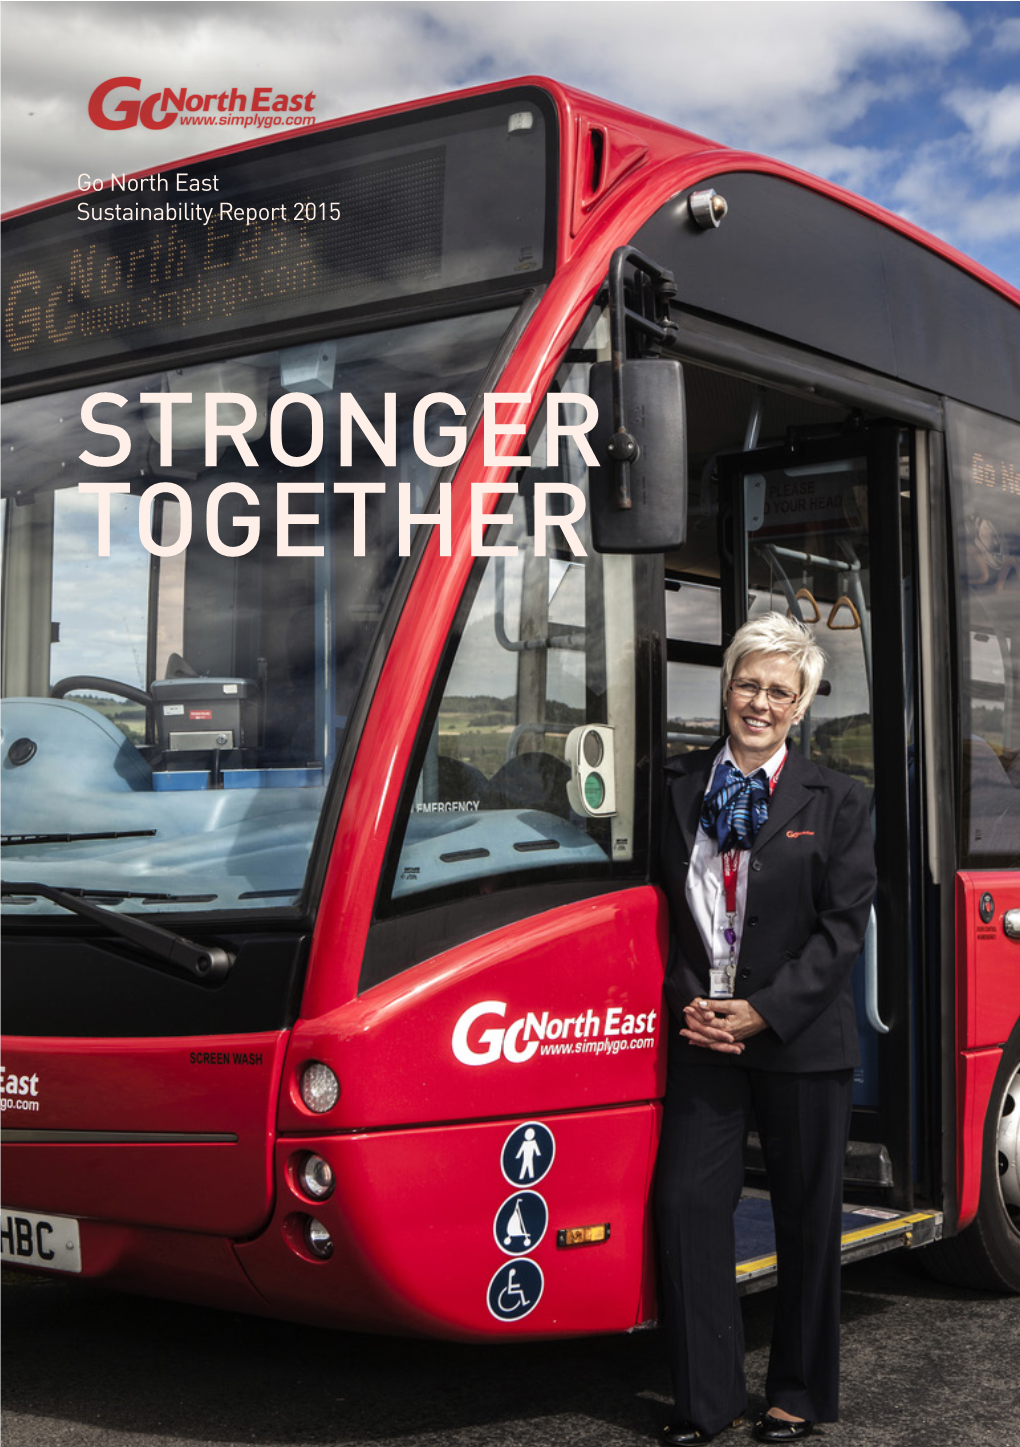 STRONGER TOGETHER OVERVIEW Go North East Is the Region’S Largest Bus Company, Operating a Fleet of Nearly 700 Buses and Coaches, and Employing More Than 2,000 People